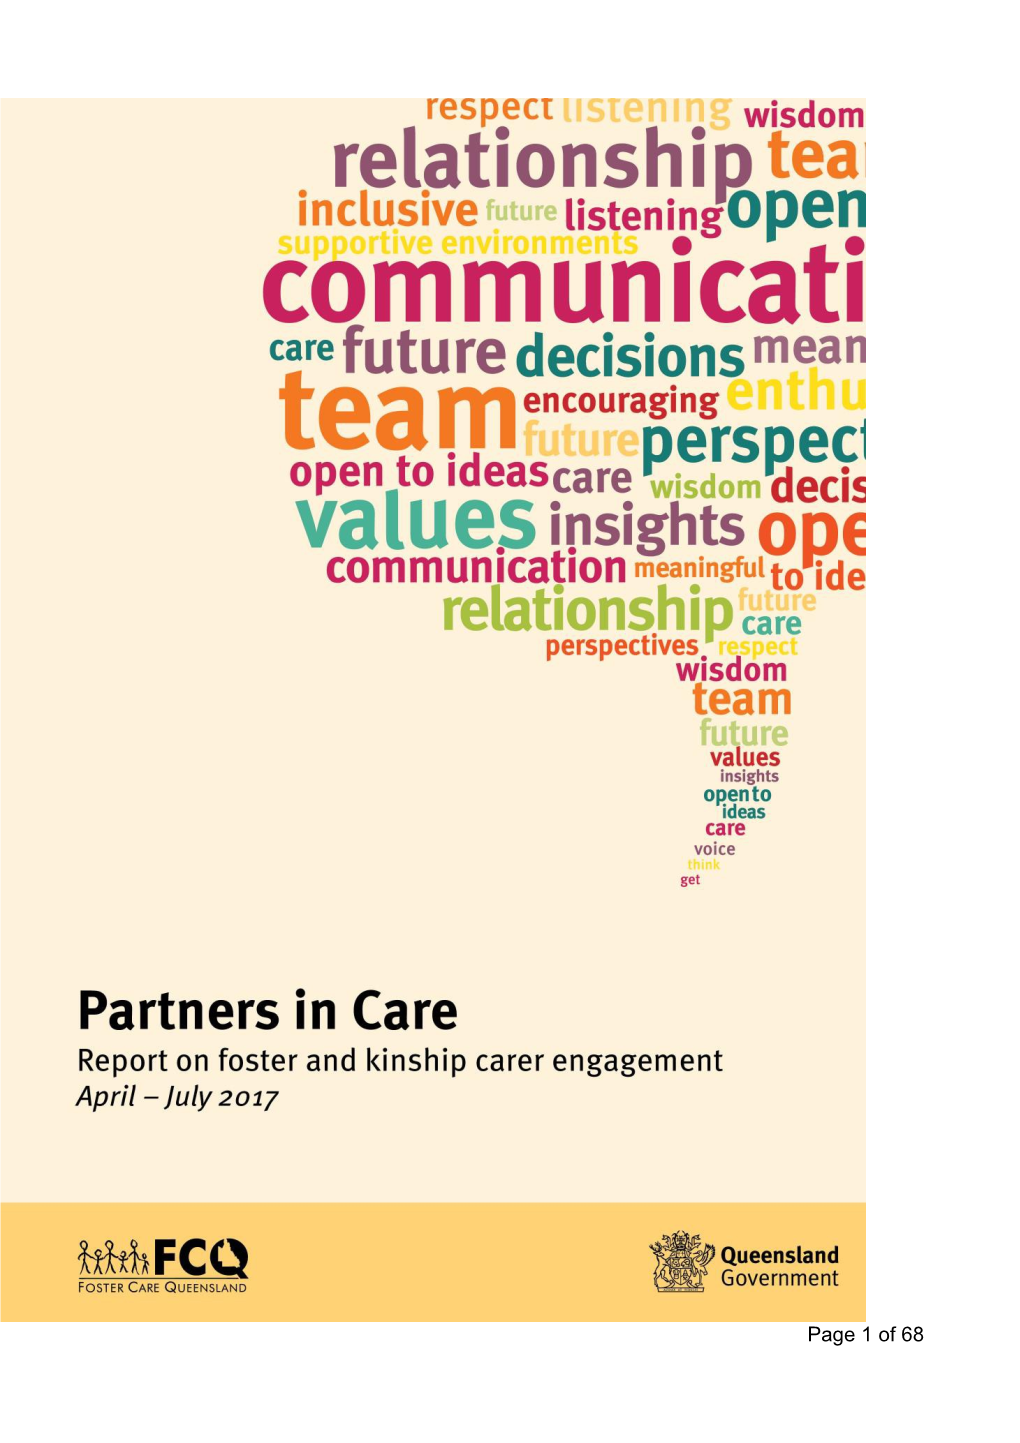 Partners in Care Final Engagement Report